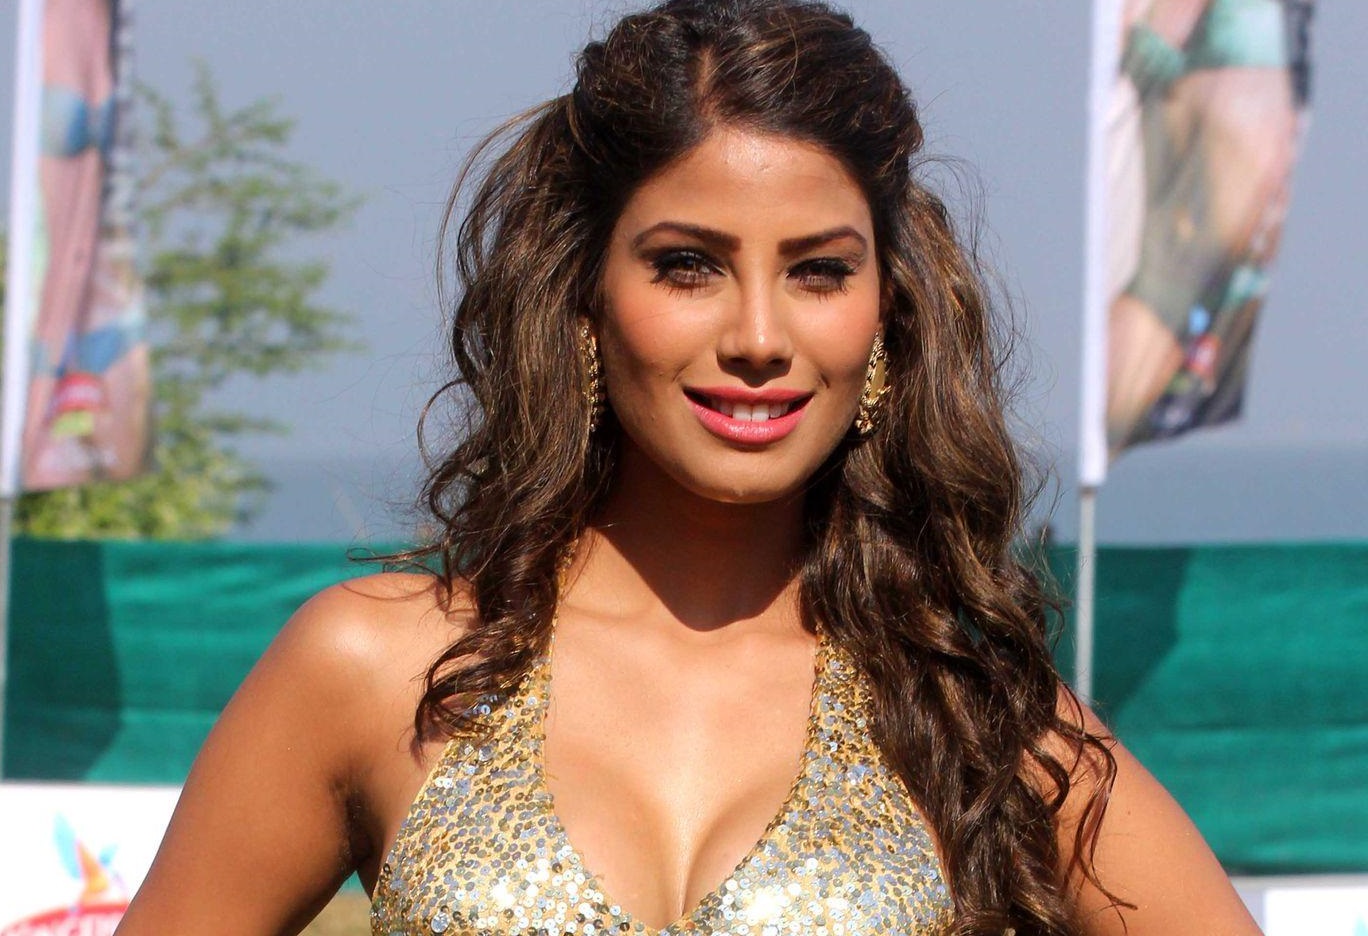 Nicole Faria in golden sequence top posing for camera - most beautiful Indian girl